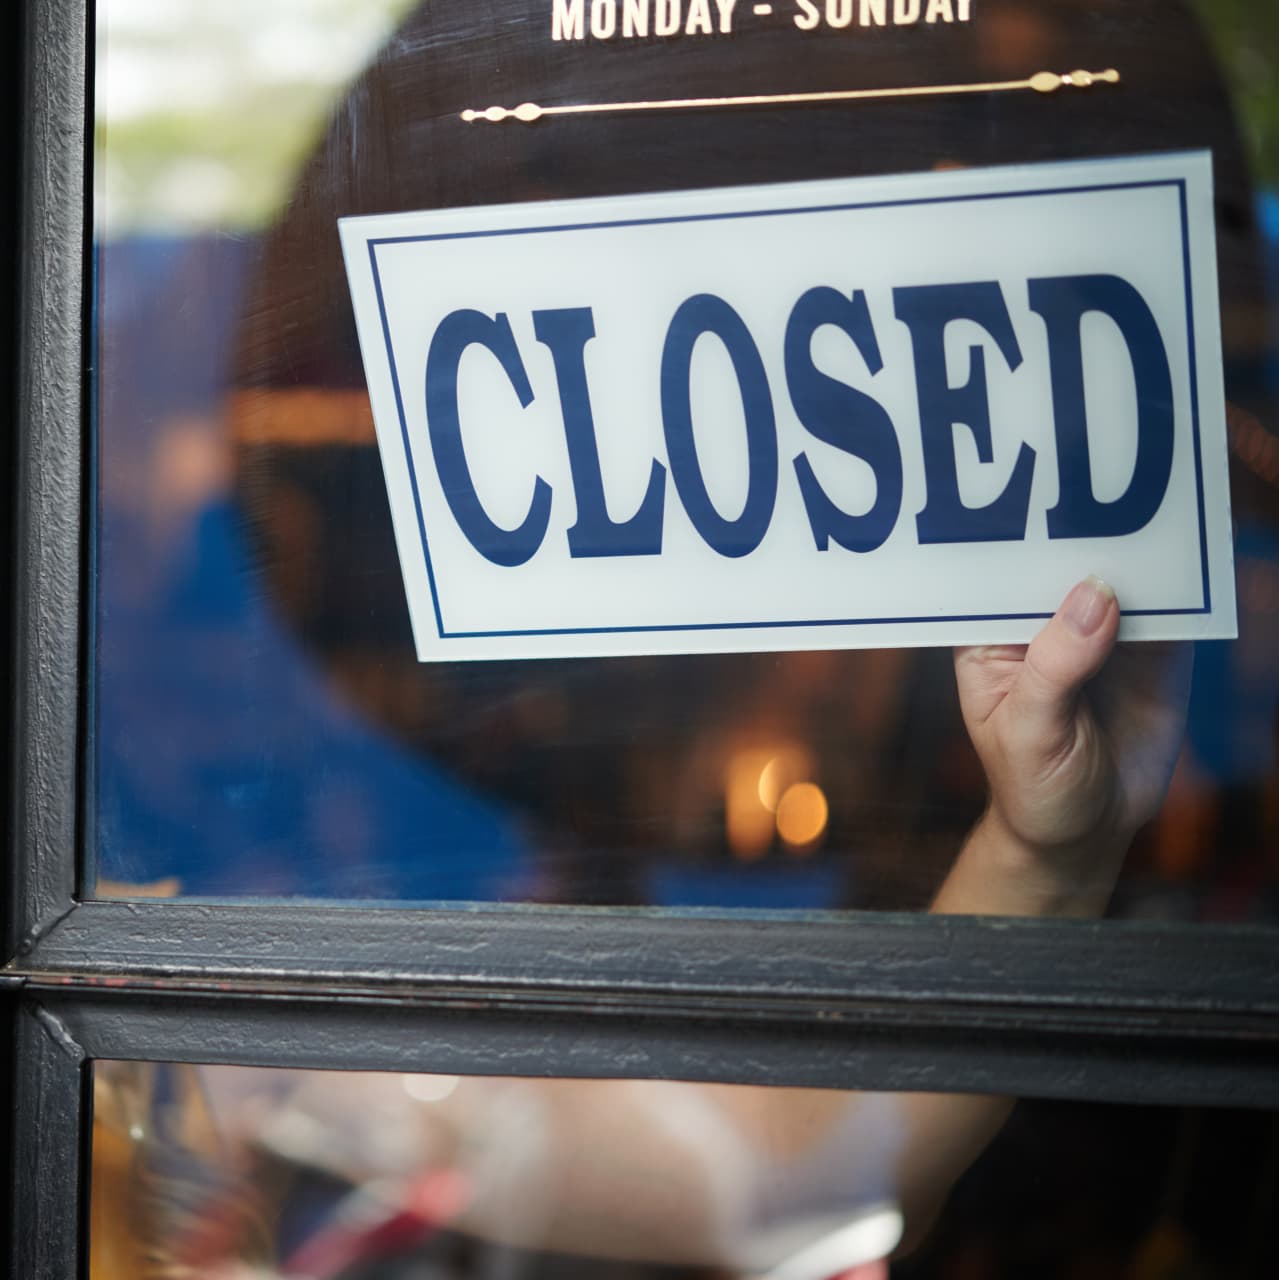 Columbus Day: Is USPS open? Are banks closed? Here's what you need